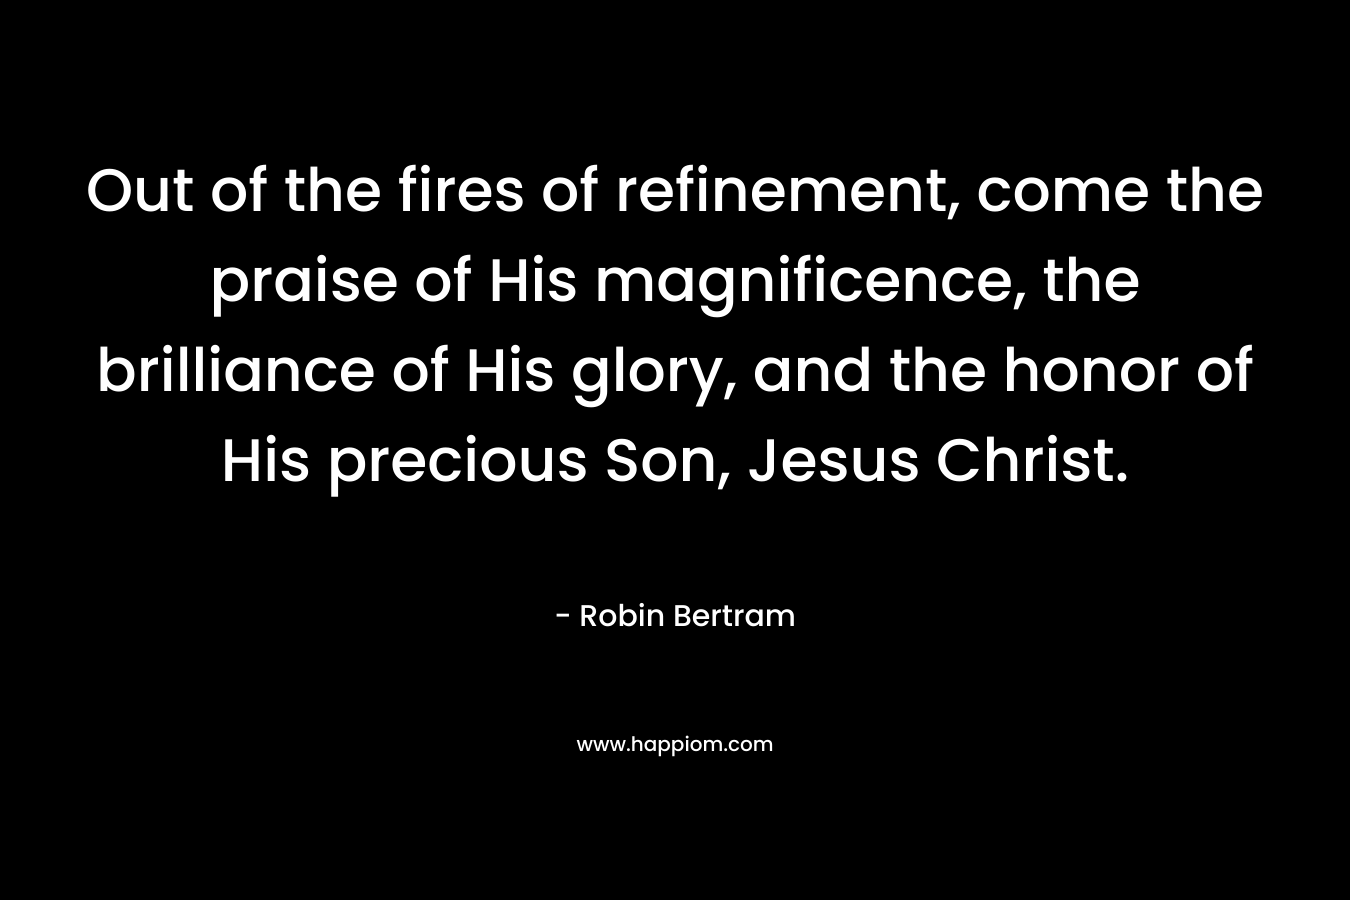 Out of the fires of refinement, come the praise of His magnificence, the brilliance of His glory, and the honor of His precious Son, Jesus Christ. – Robin Bertram